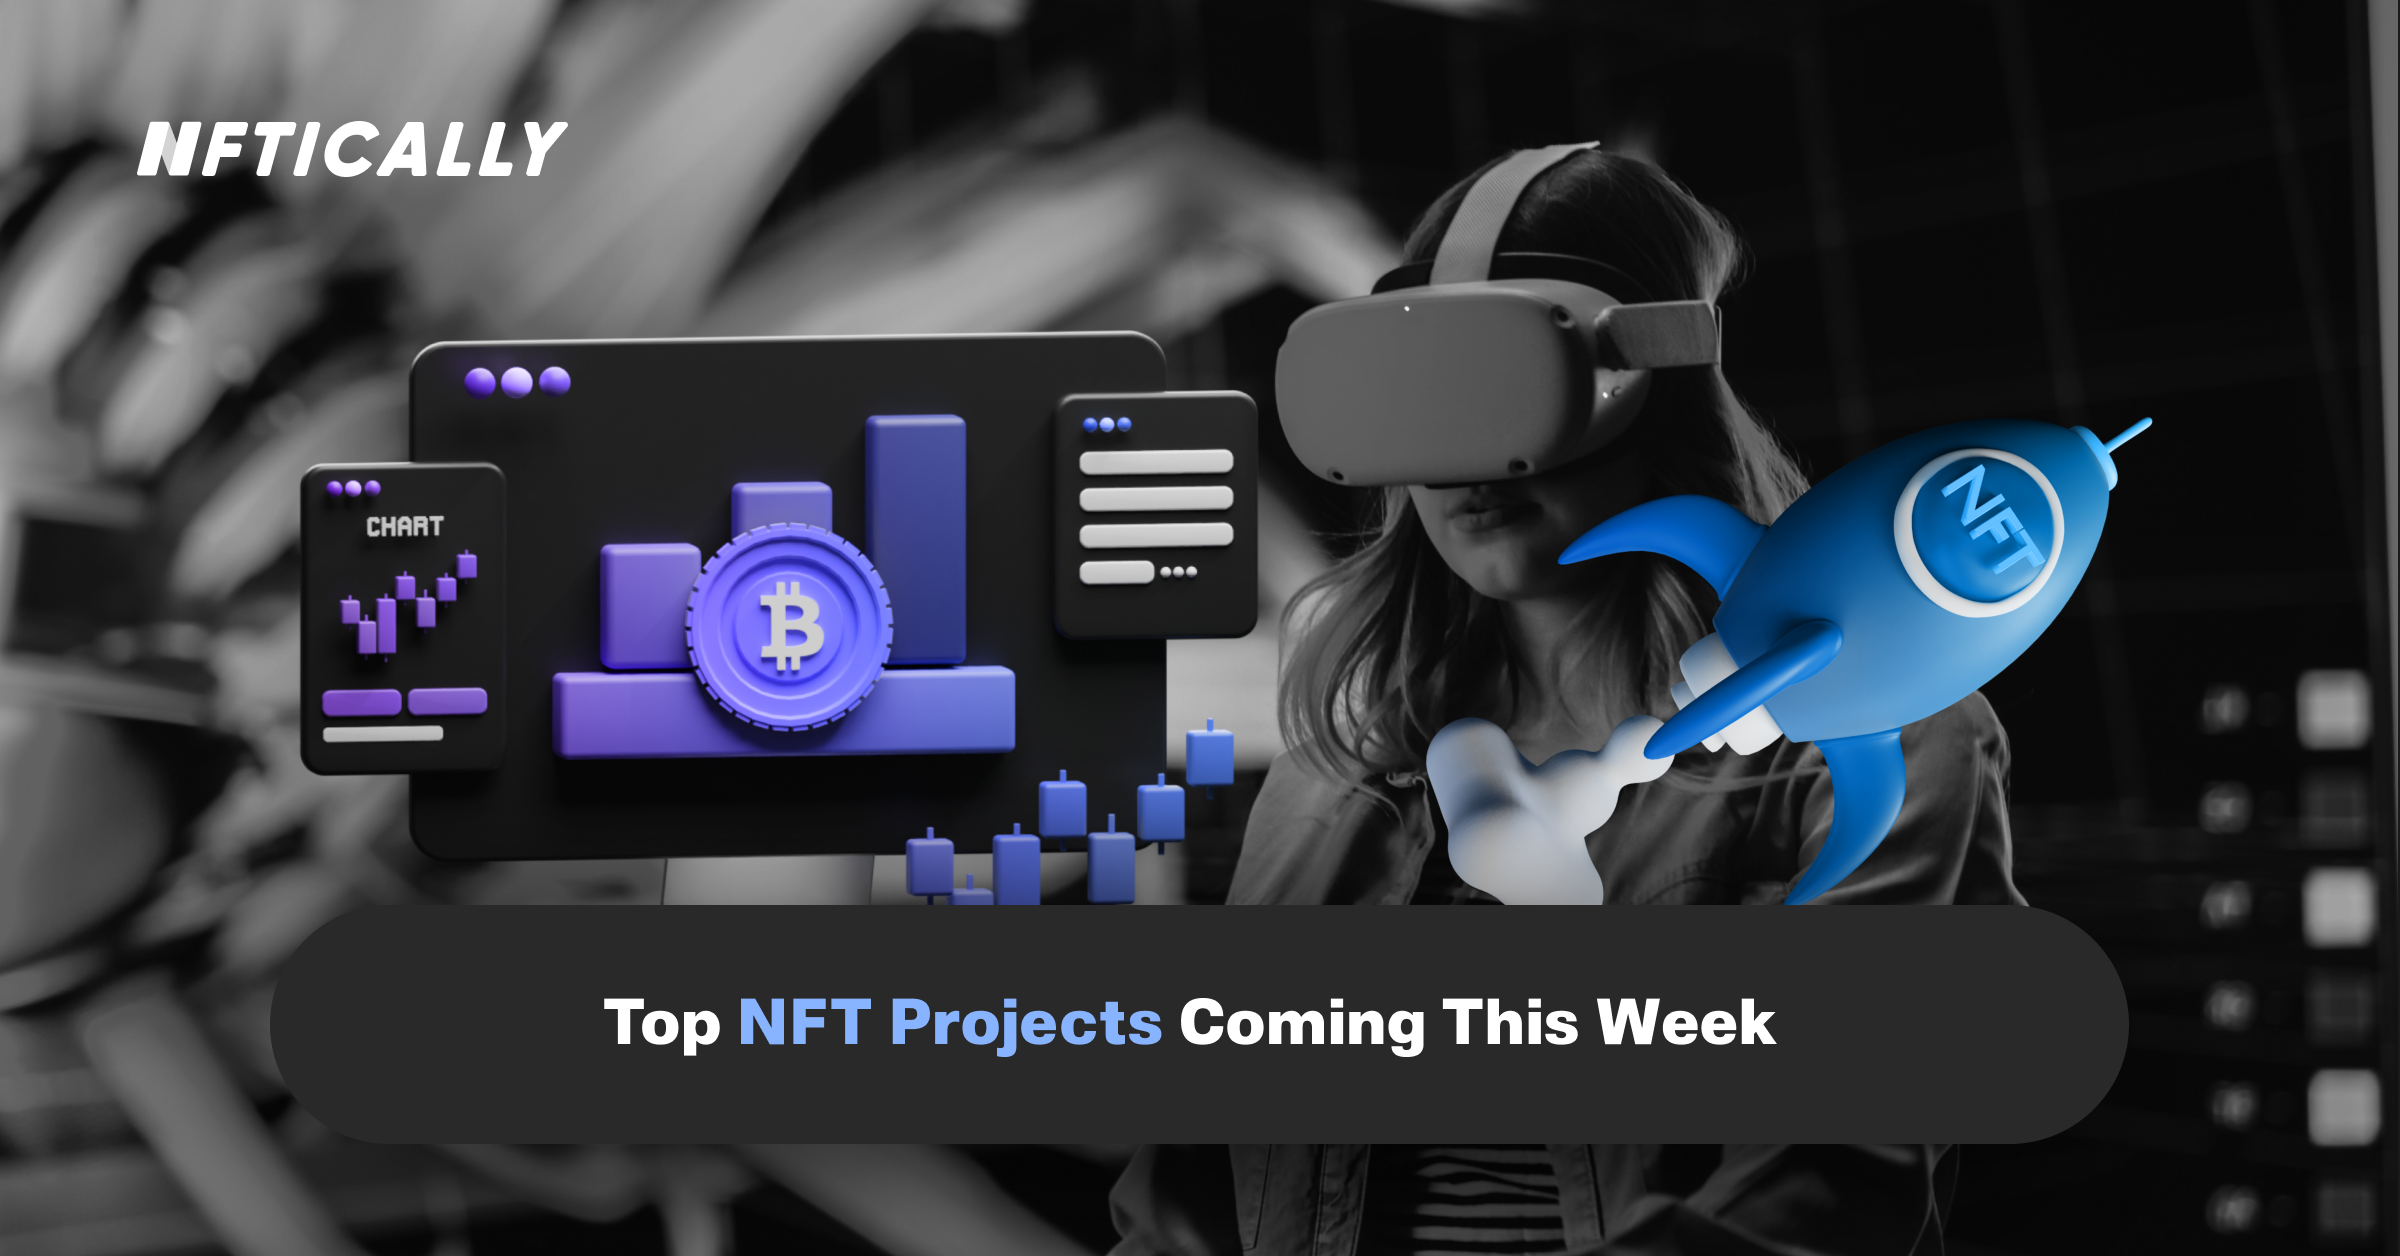 Top NFT Projects Coming This Week